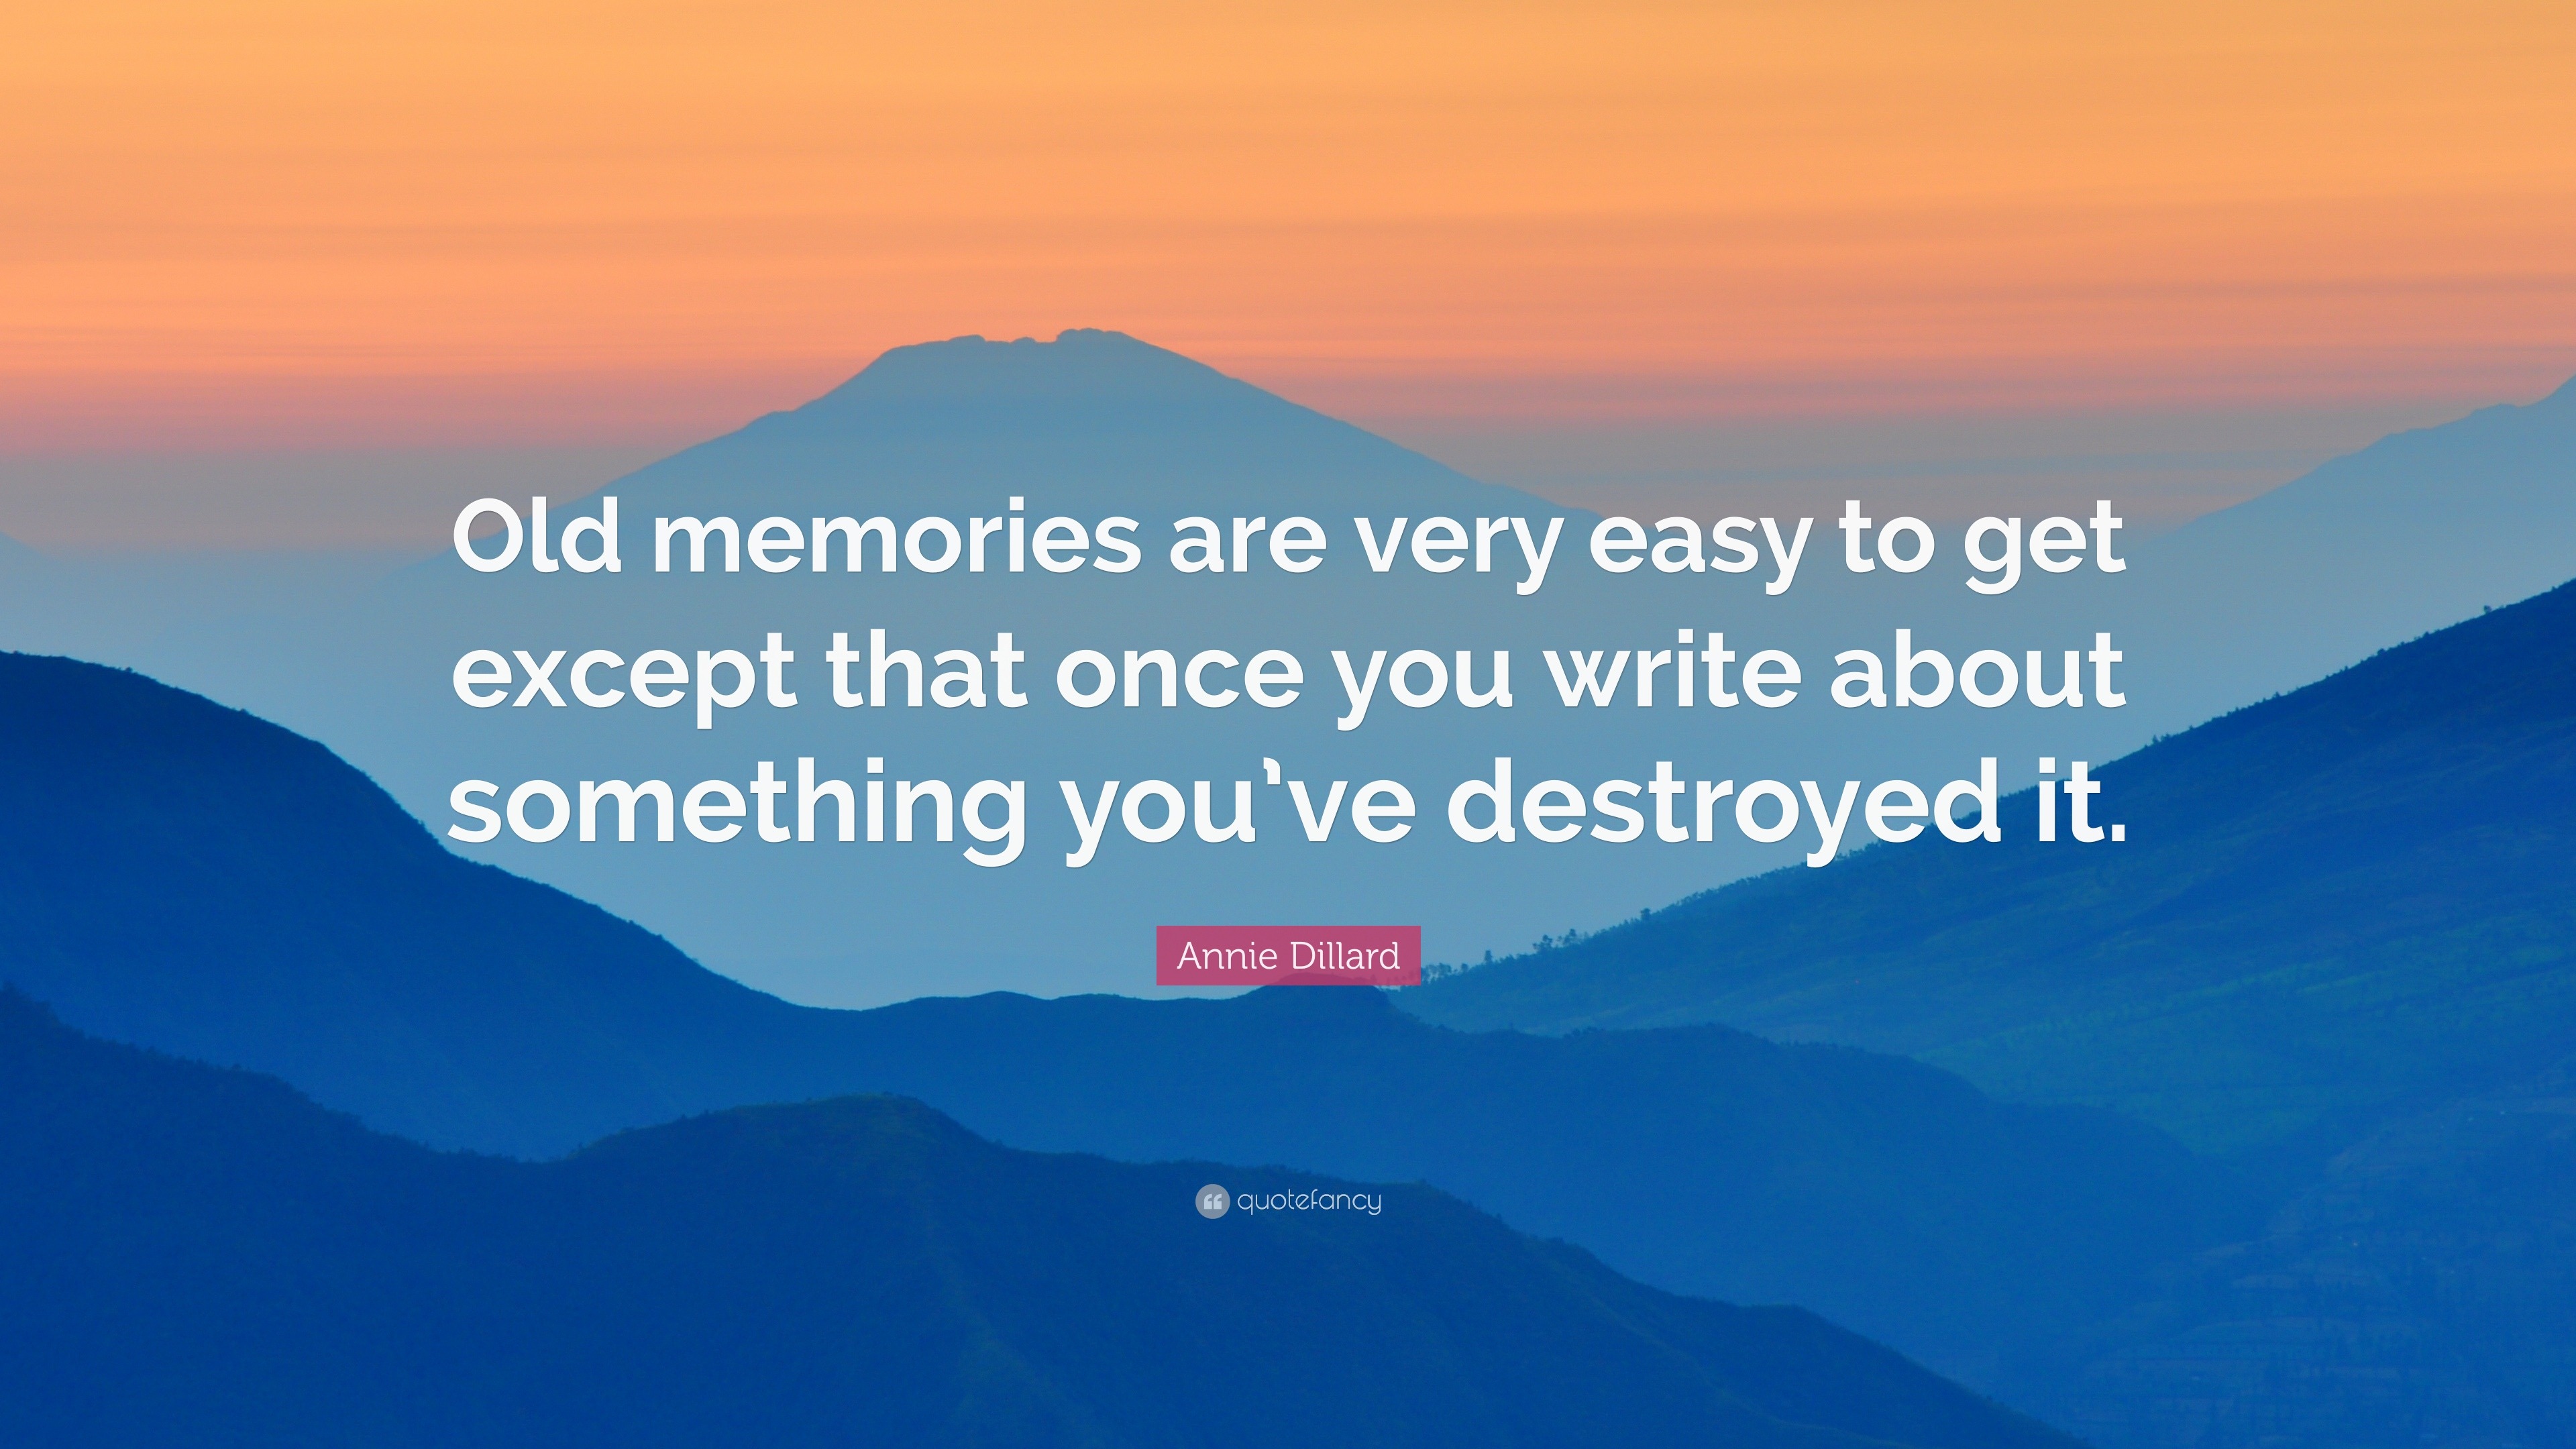 Annie Dillard Quote: “Old memories are very easy to get except